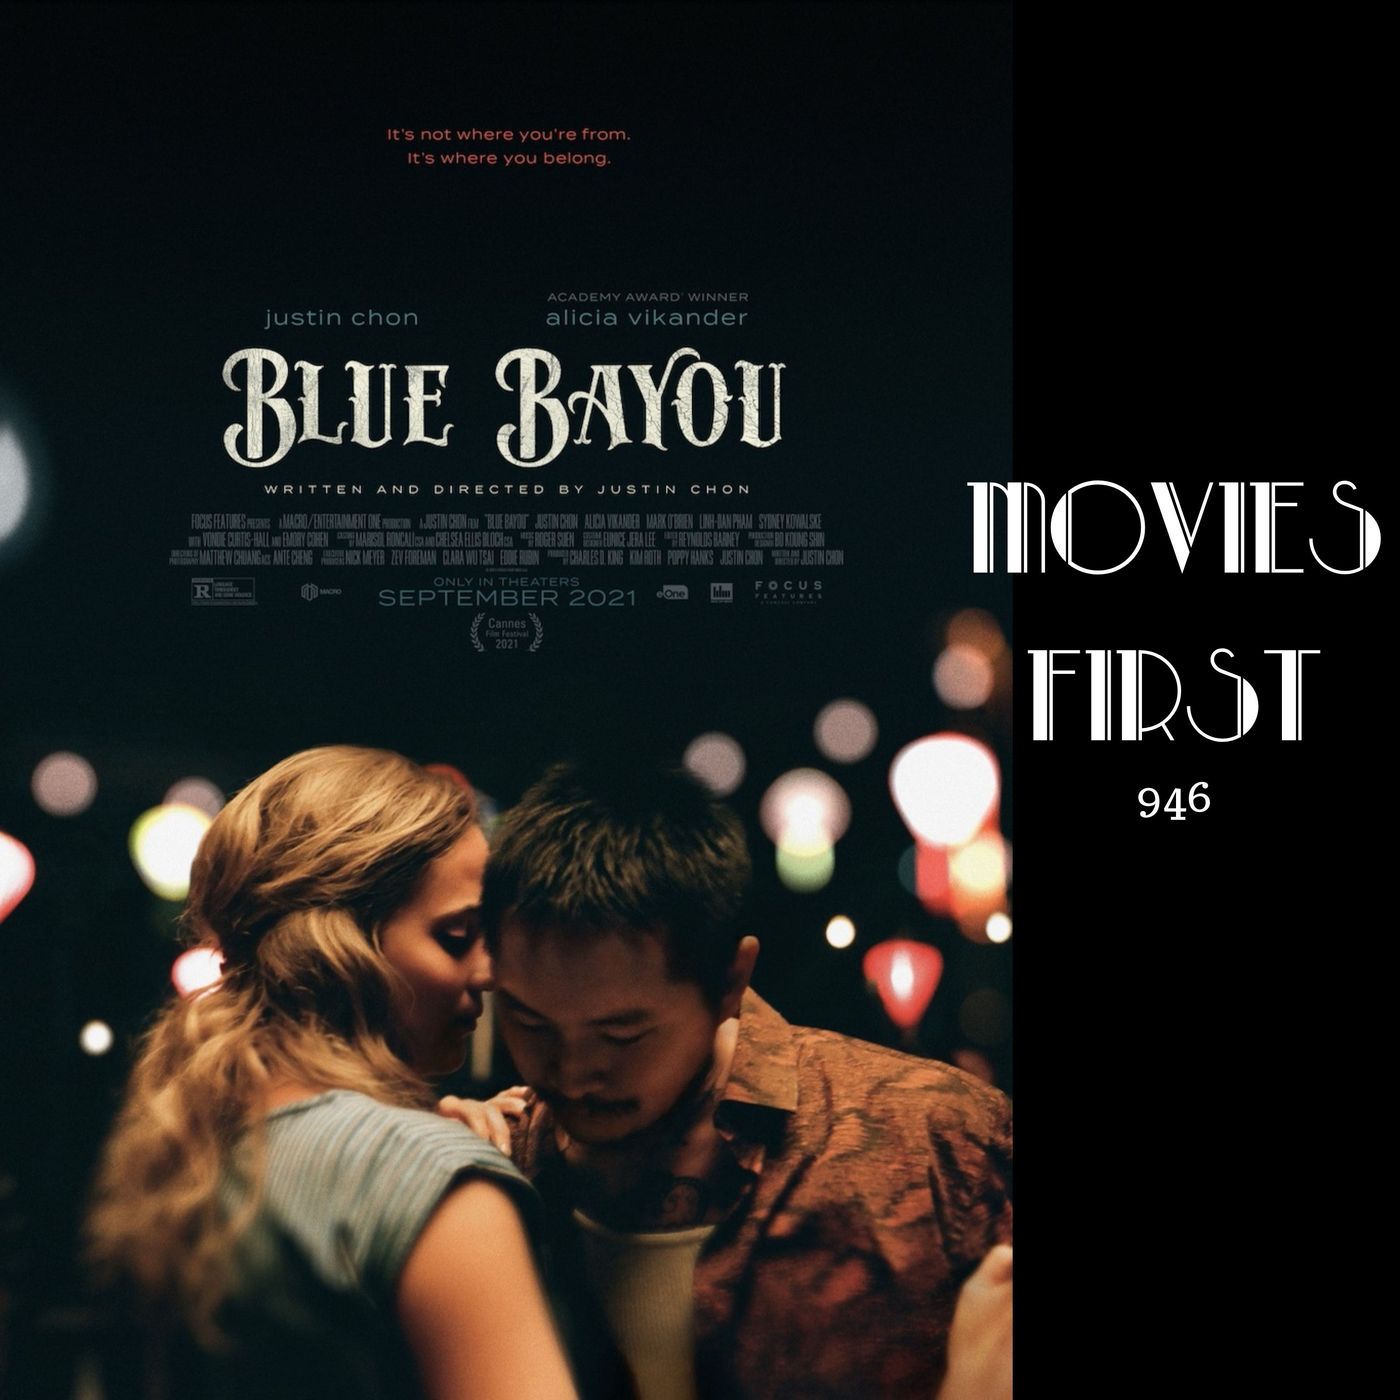 Blue Bayou (Drama) (the @MoviesFirst review)